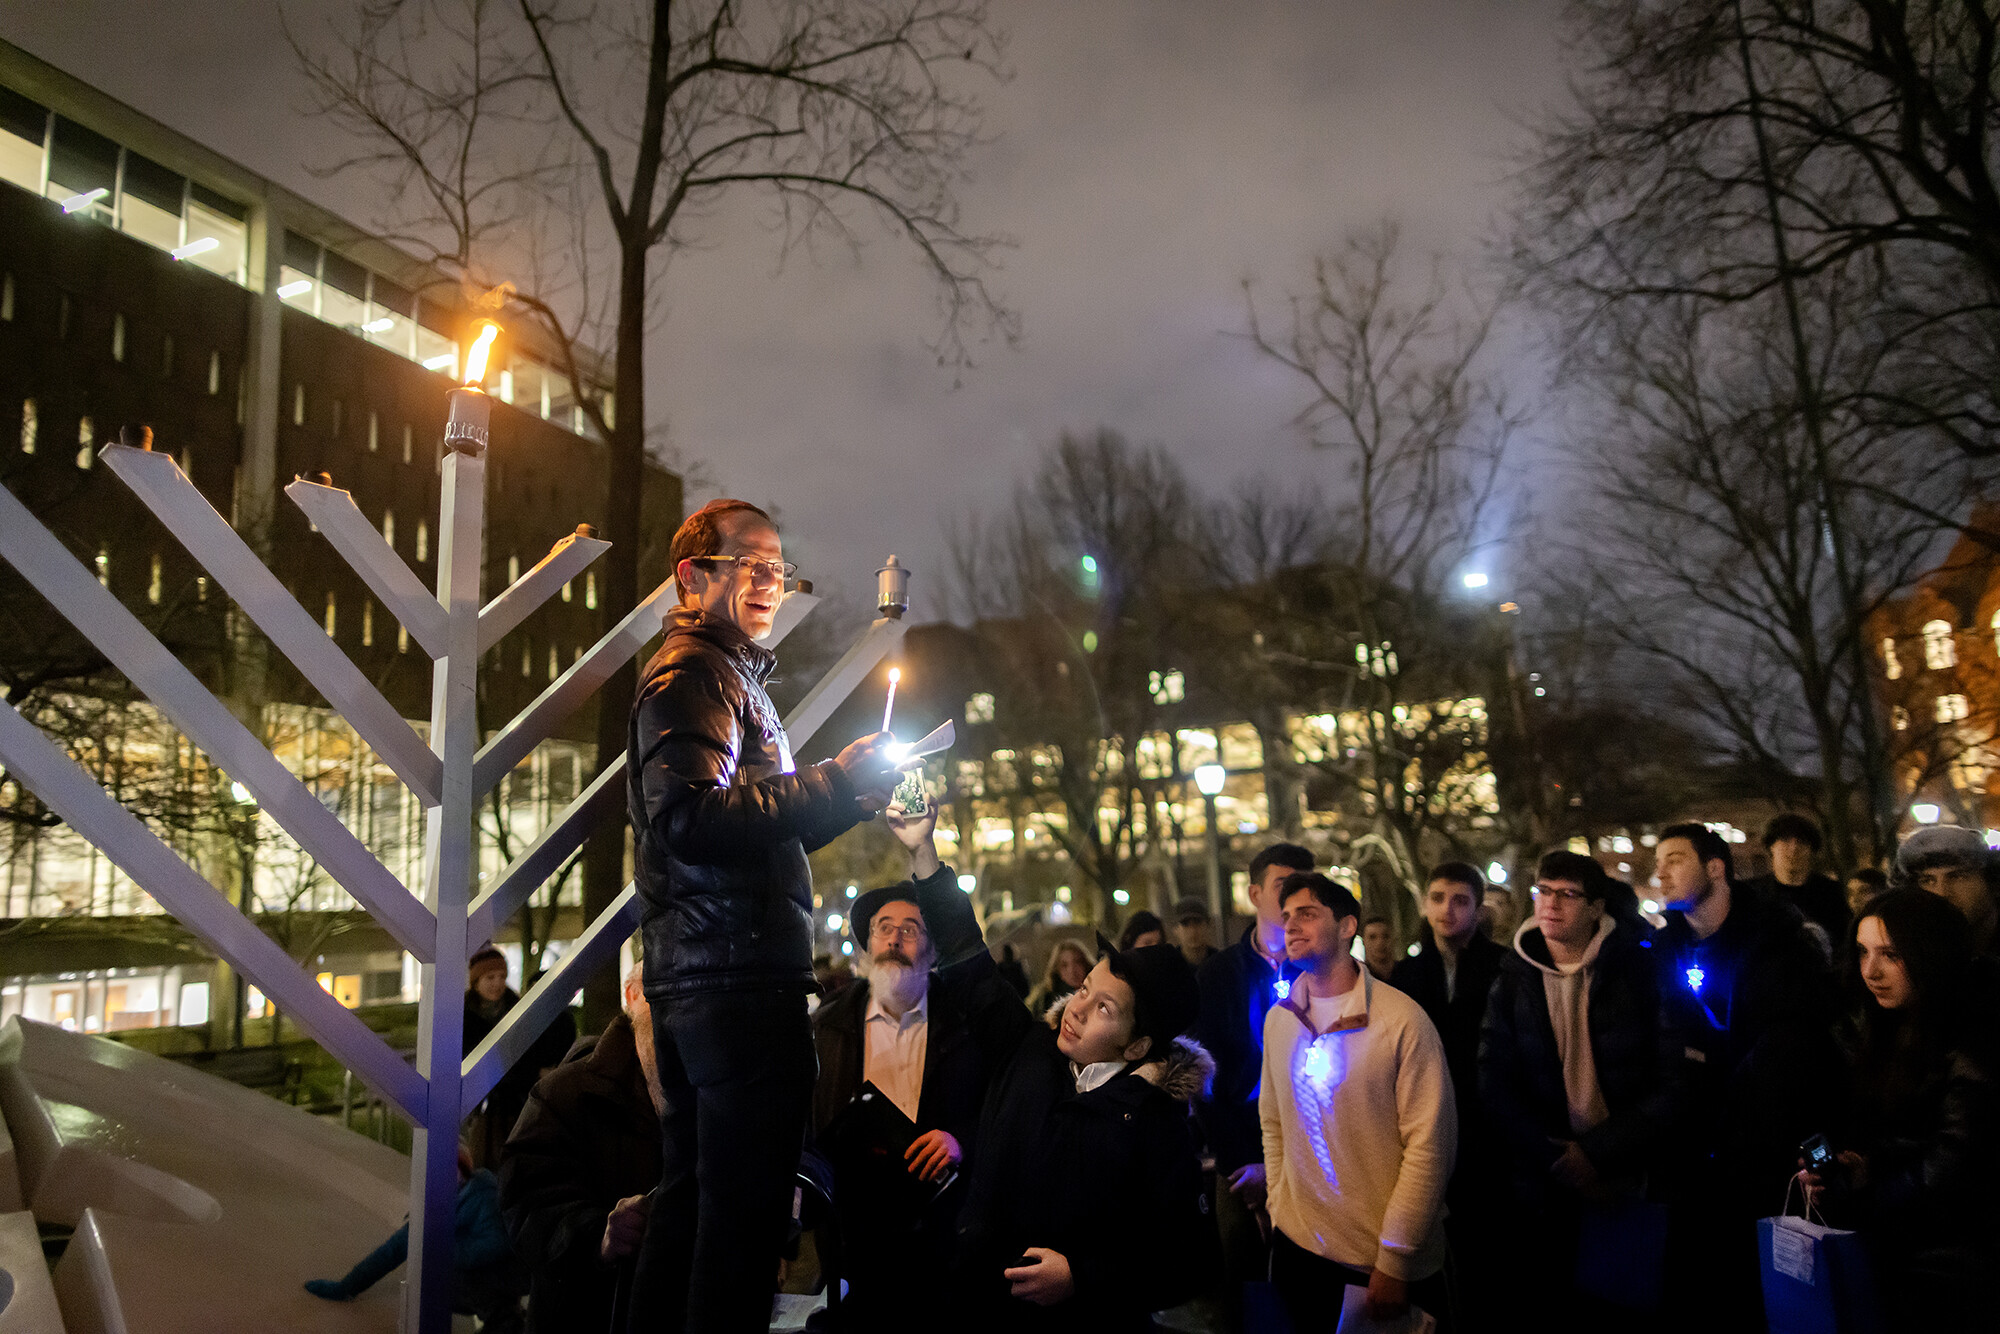 A crowd outside Van Pelt Library and a large menorah to celebrate the start of Hanukkah.